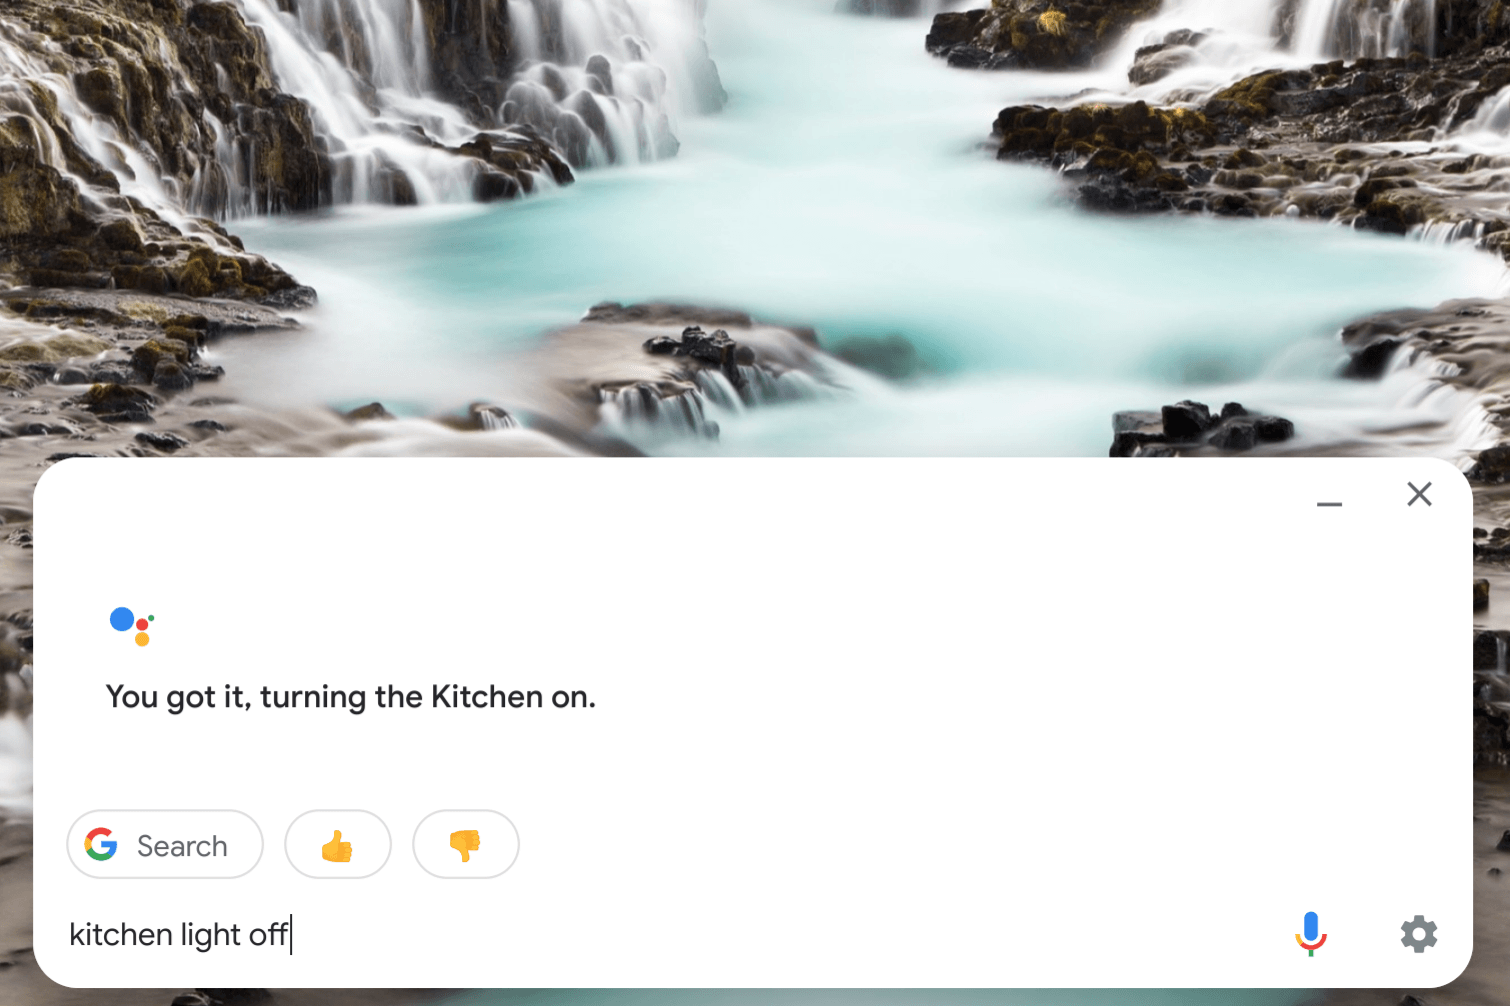 Chrome OS 72 bringing Google Assistant to more Chromebooks: Here’s how it looks